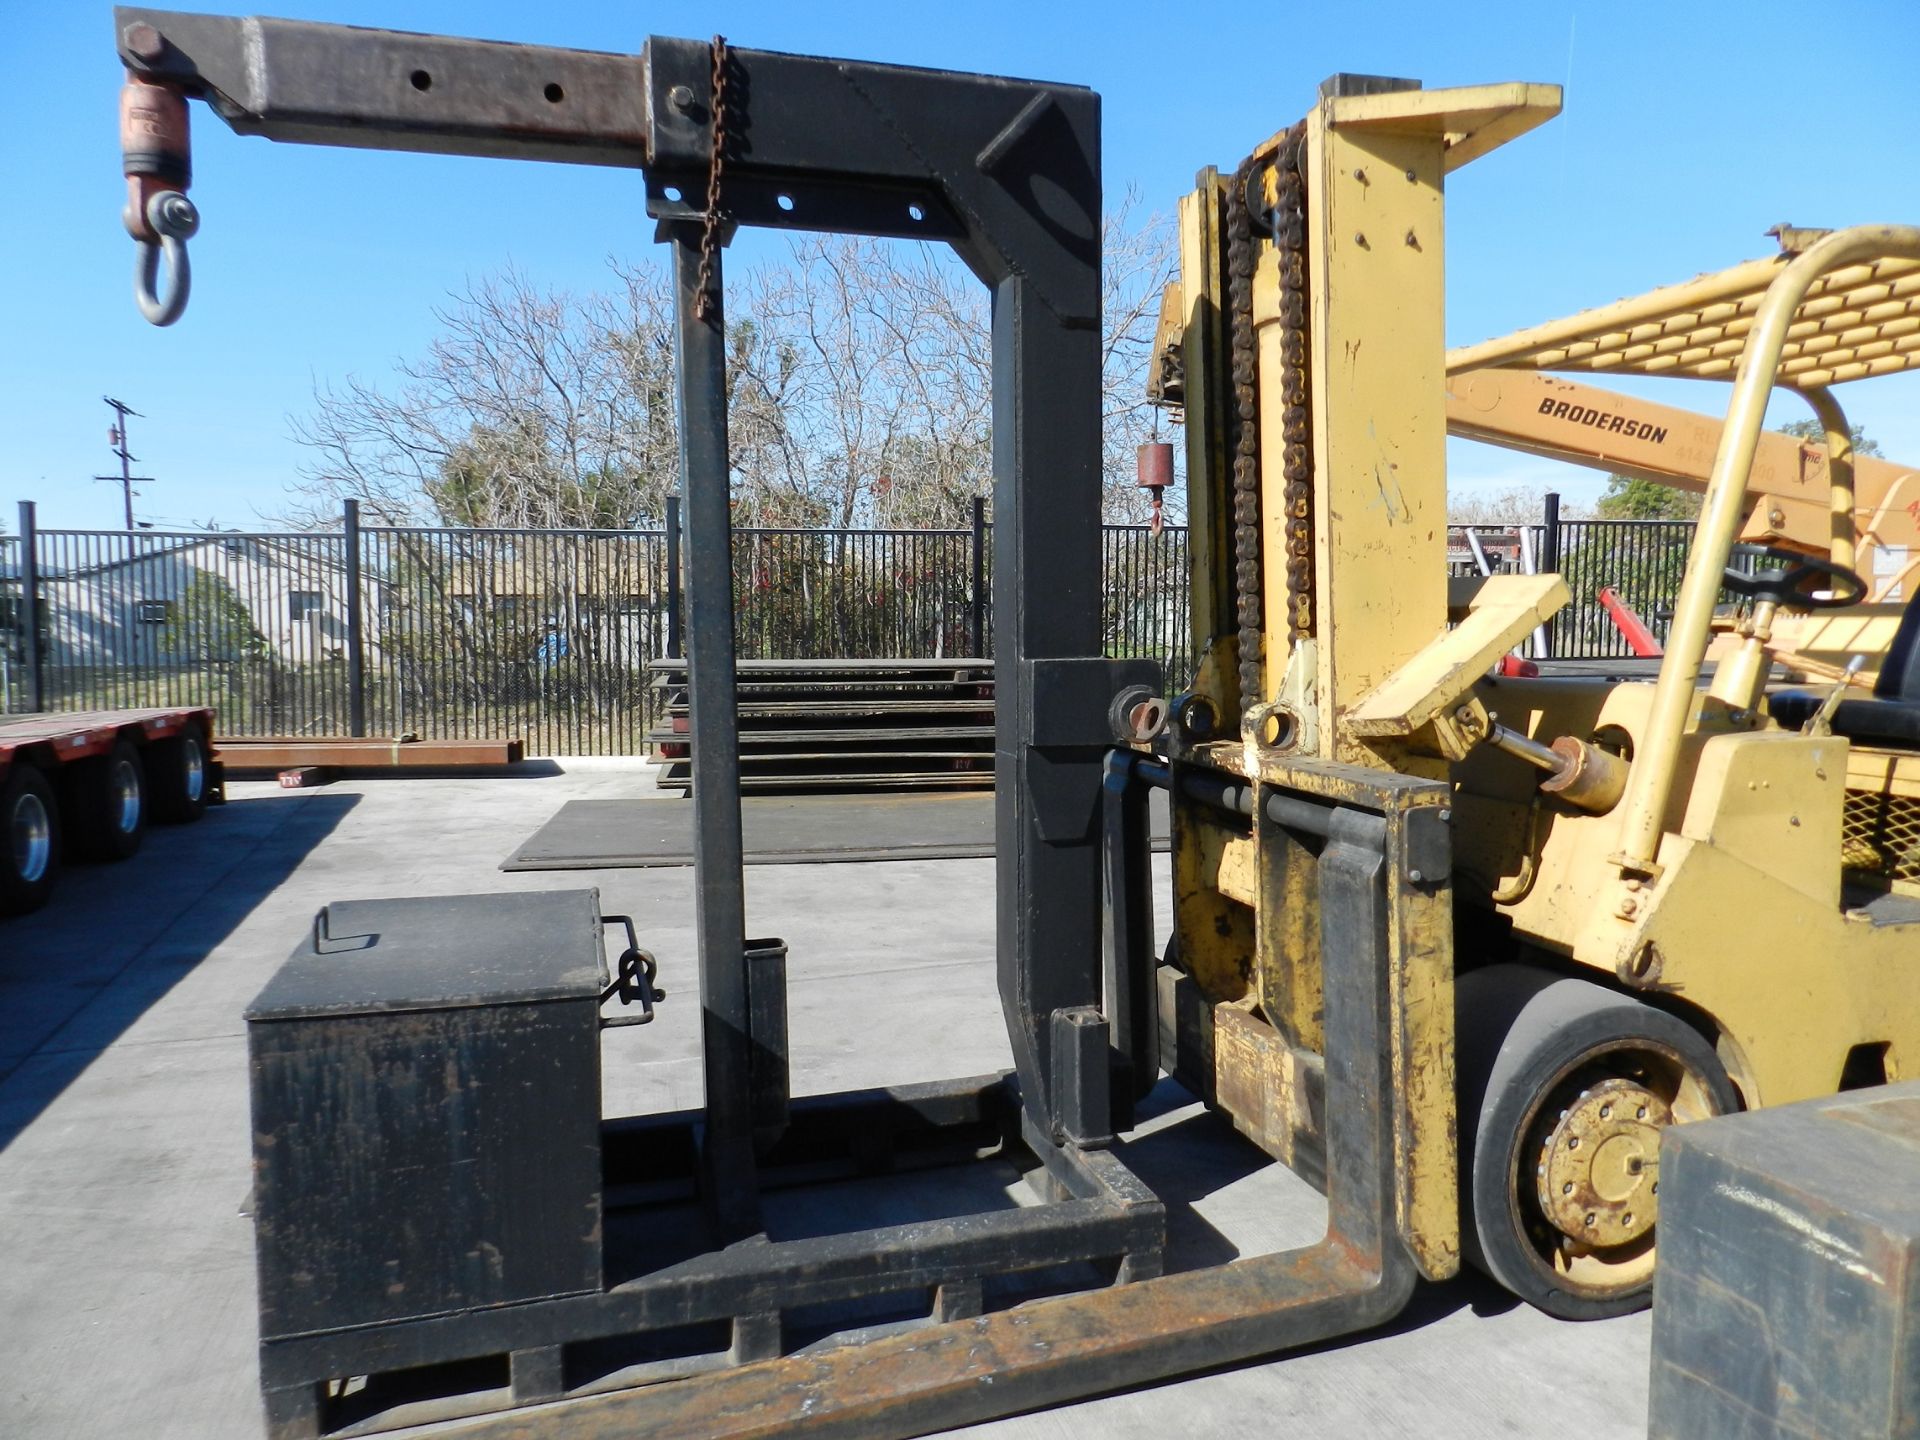 CATERPILLAR T 300 LPG FORKLIFT, 30,000 LB CAPACITY, CUSHION TIRES, BOOM ATTACHMENT WITH STAND, - Image 20 of 21